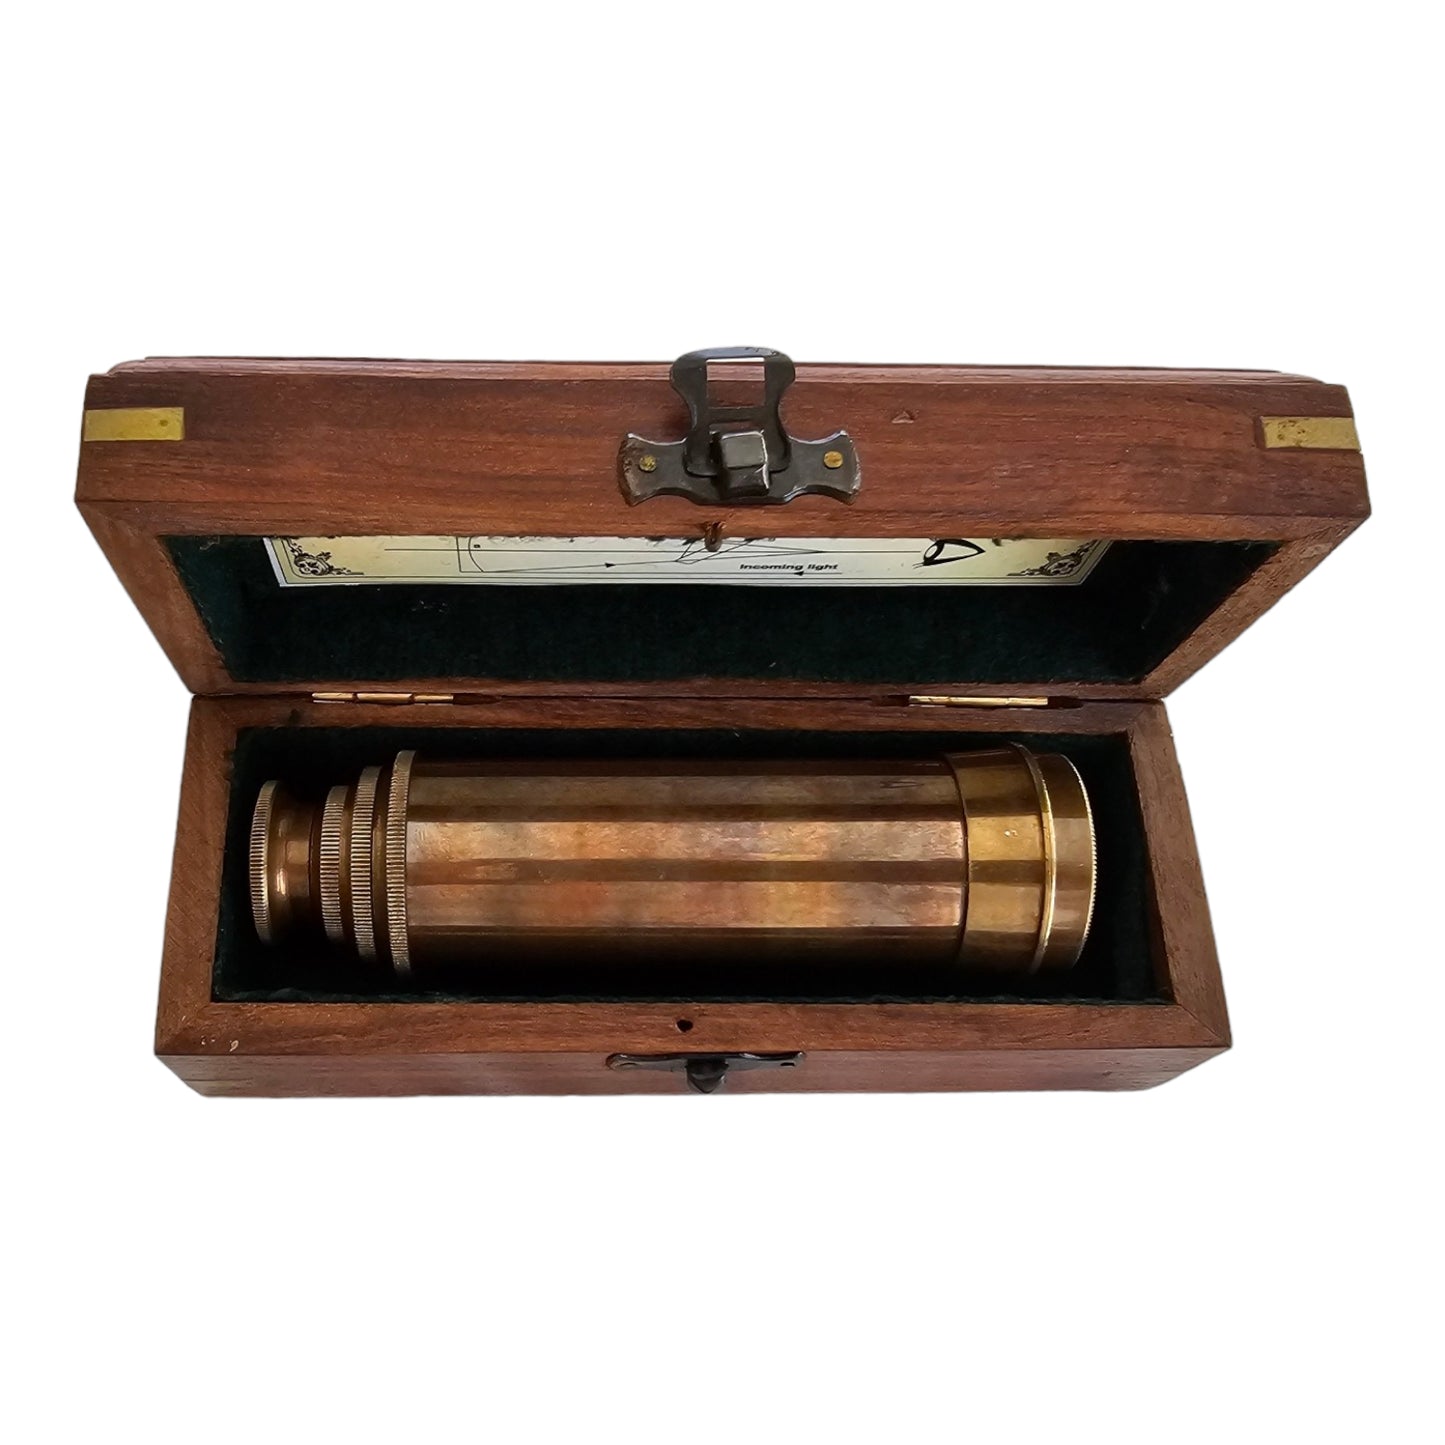 The Humble Pirate’s Telescope ANTIQUE Brass Metal (With BOX)